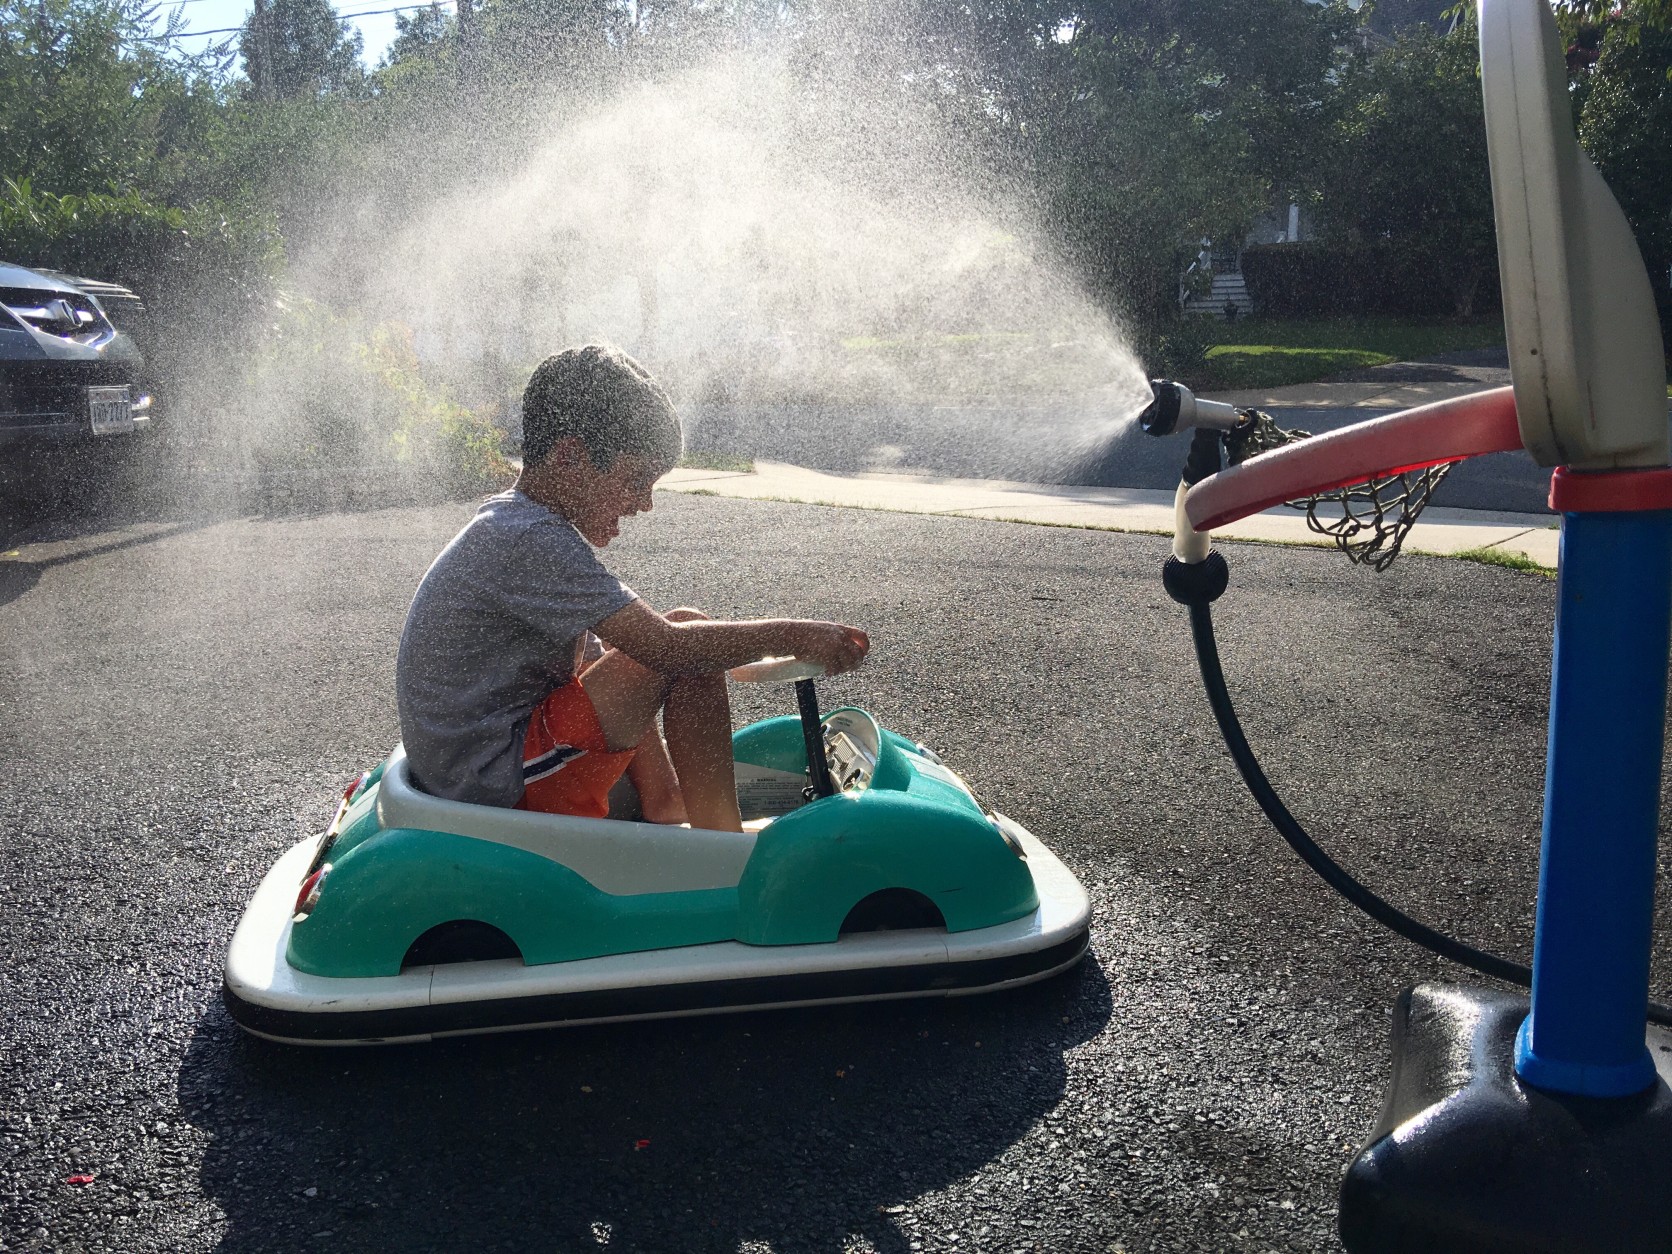 This is absolute fun in the hot weather. (Courtesy WTOP listener)